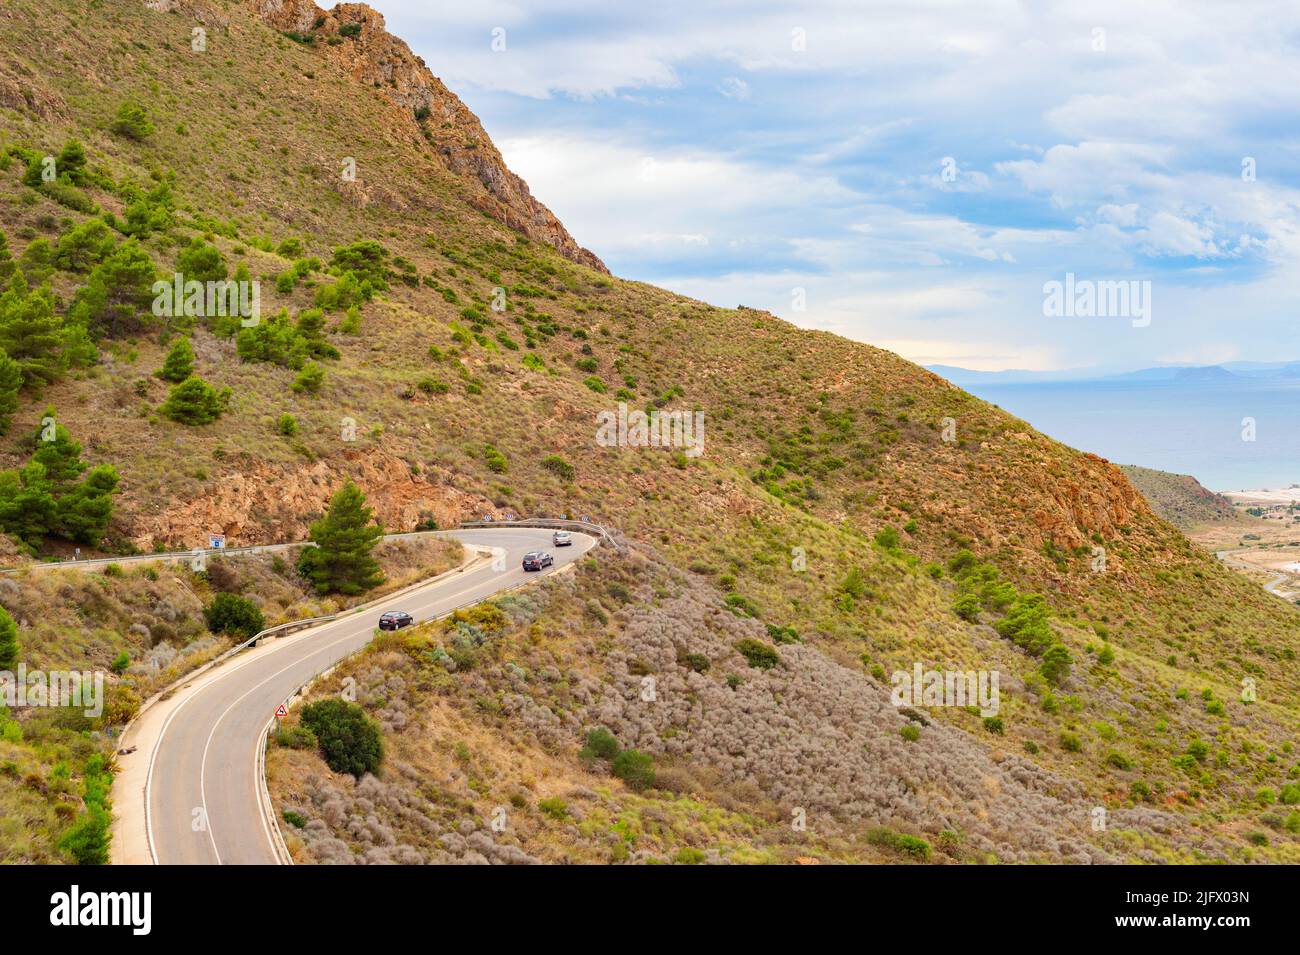 Aerial view of cars on road curve, mountains landscape, Spain Stock Photo